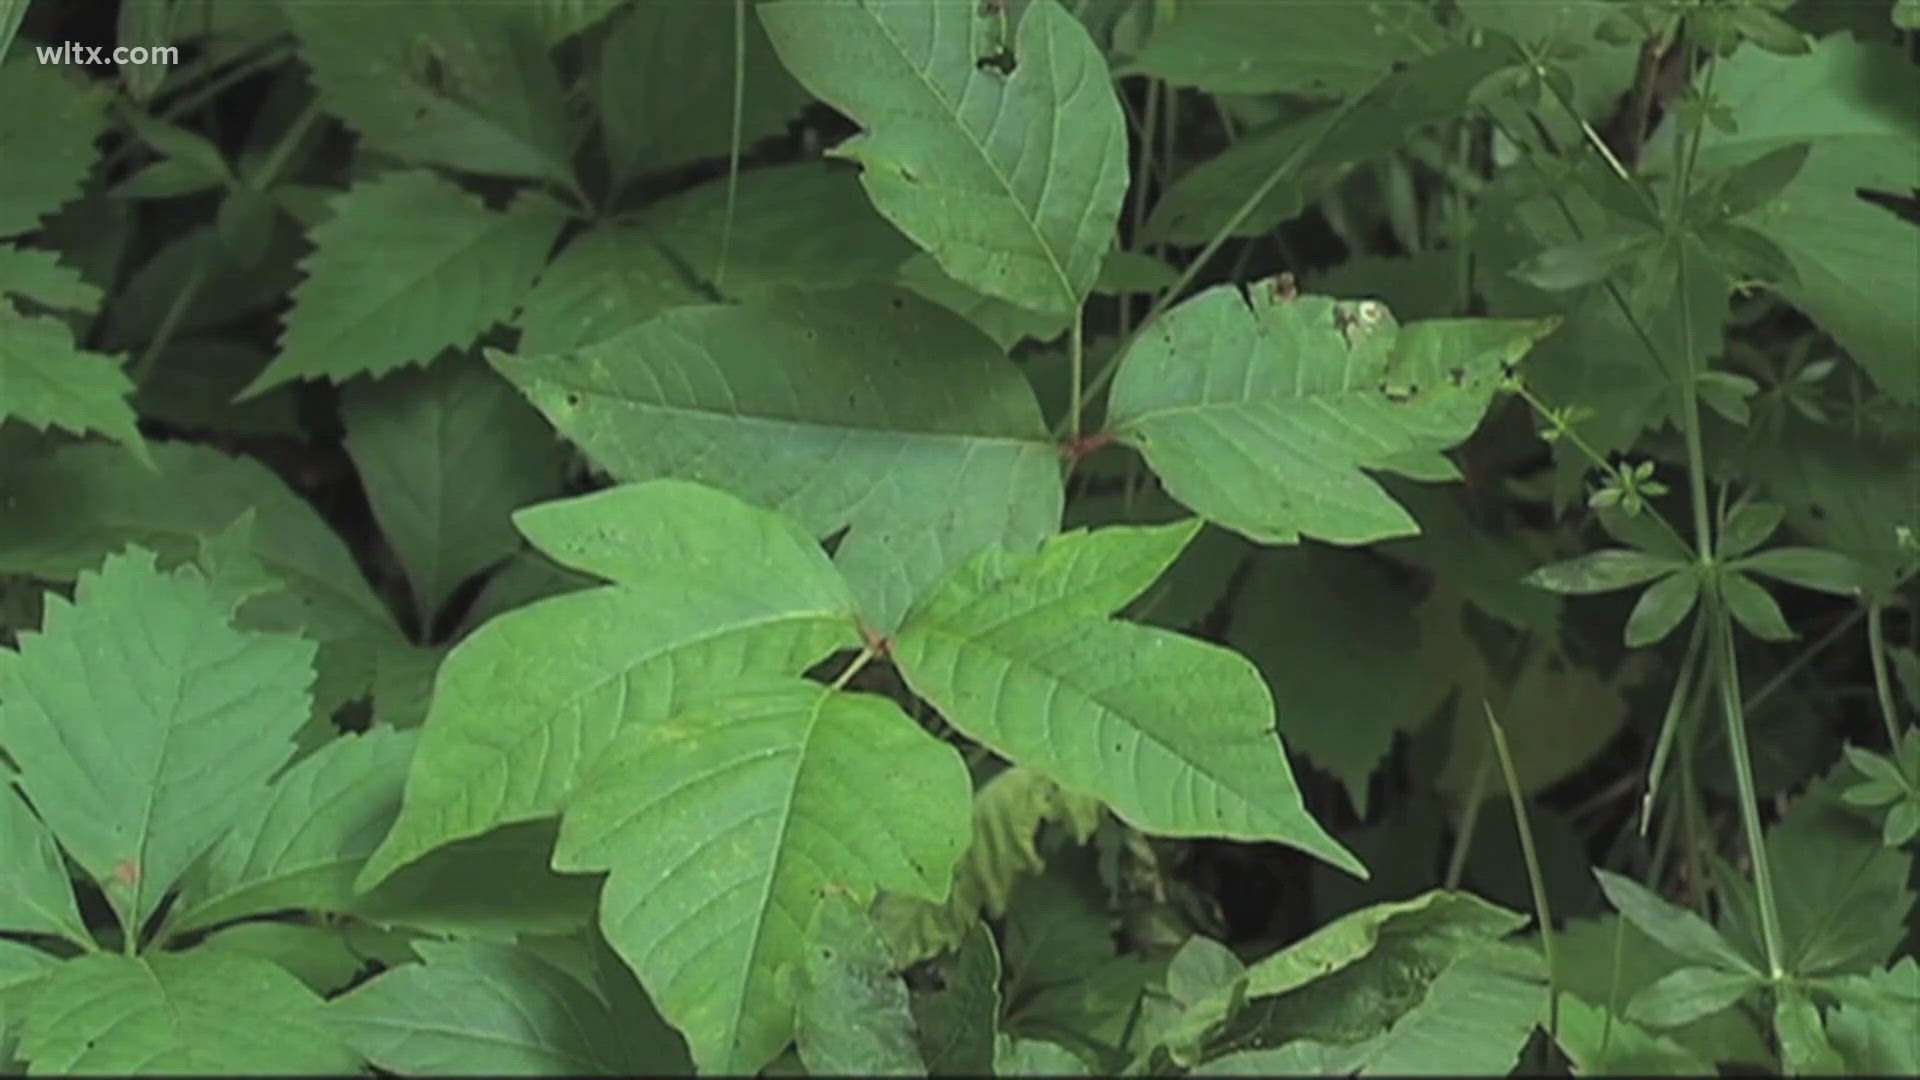 How does poison ivy effect your skin and how to avoid it.